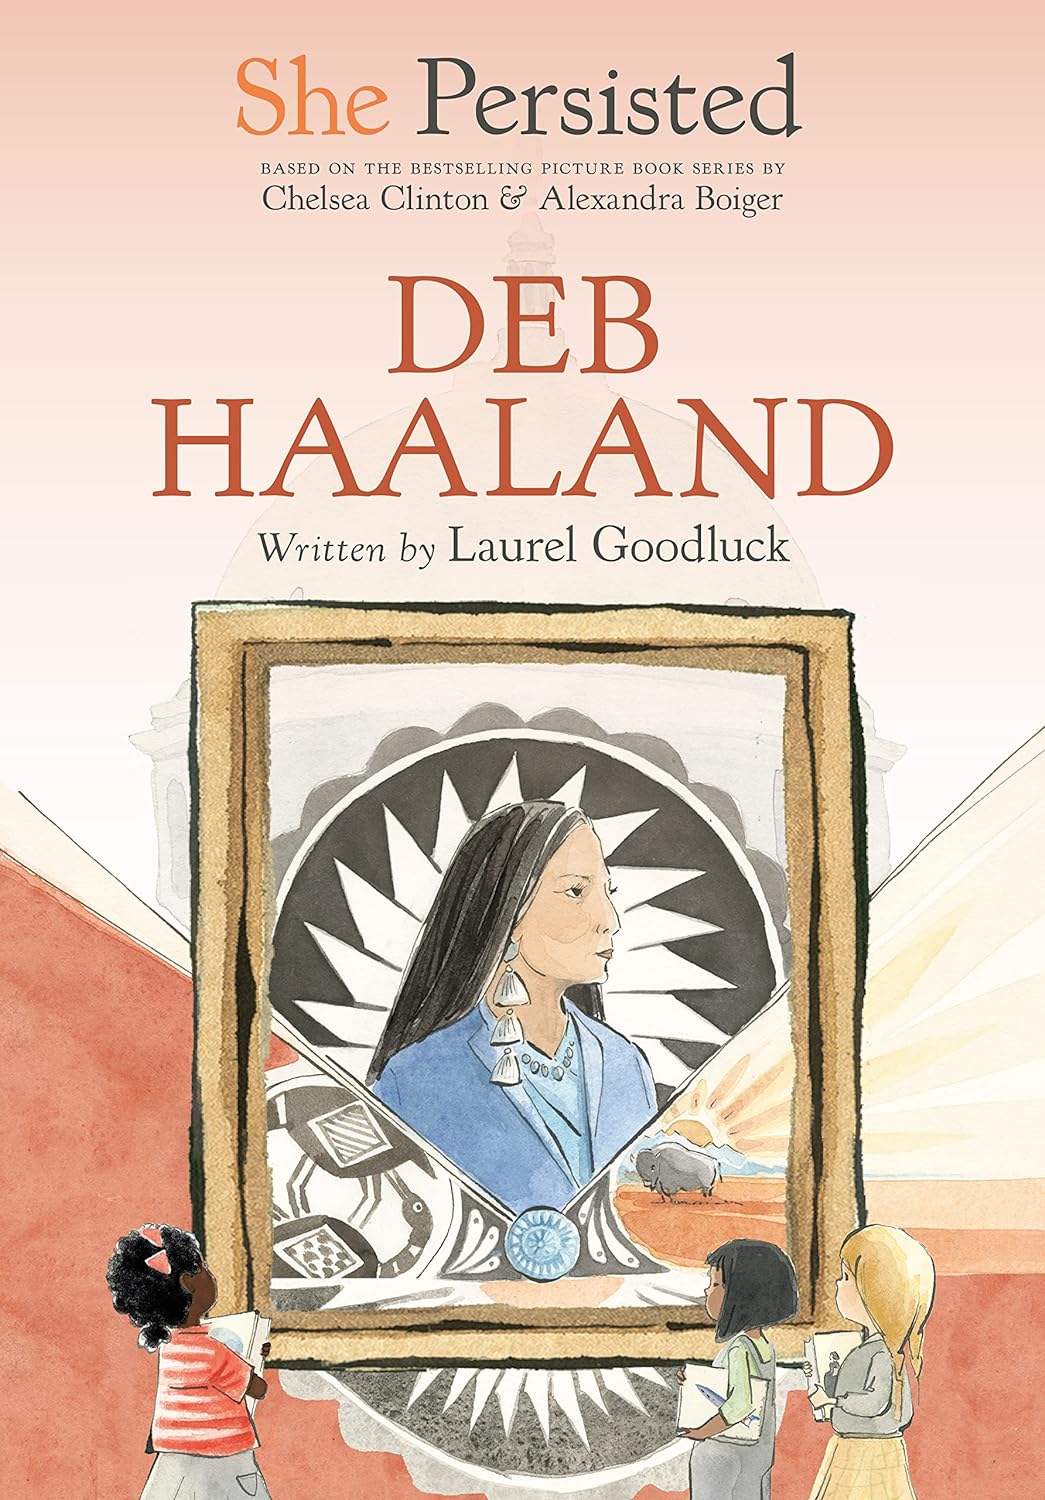 She Persisted: Deb Haaland by Laurel Goodluck